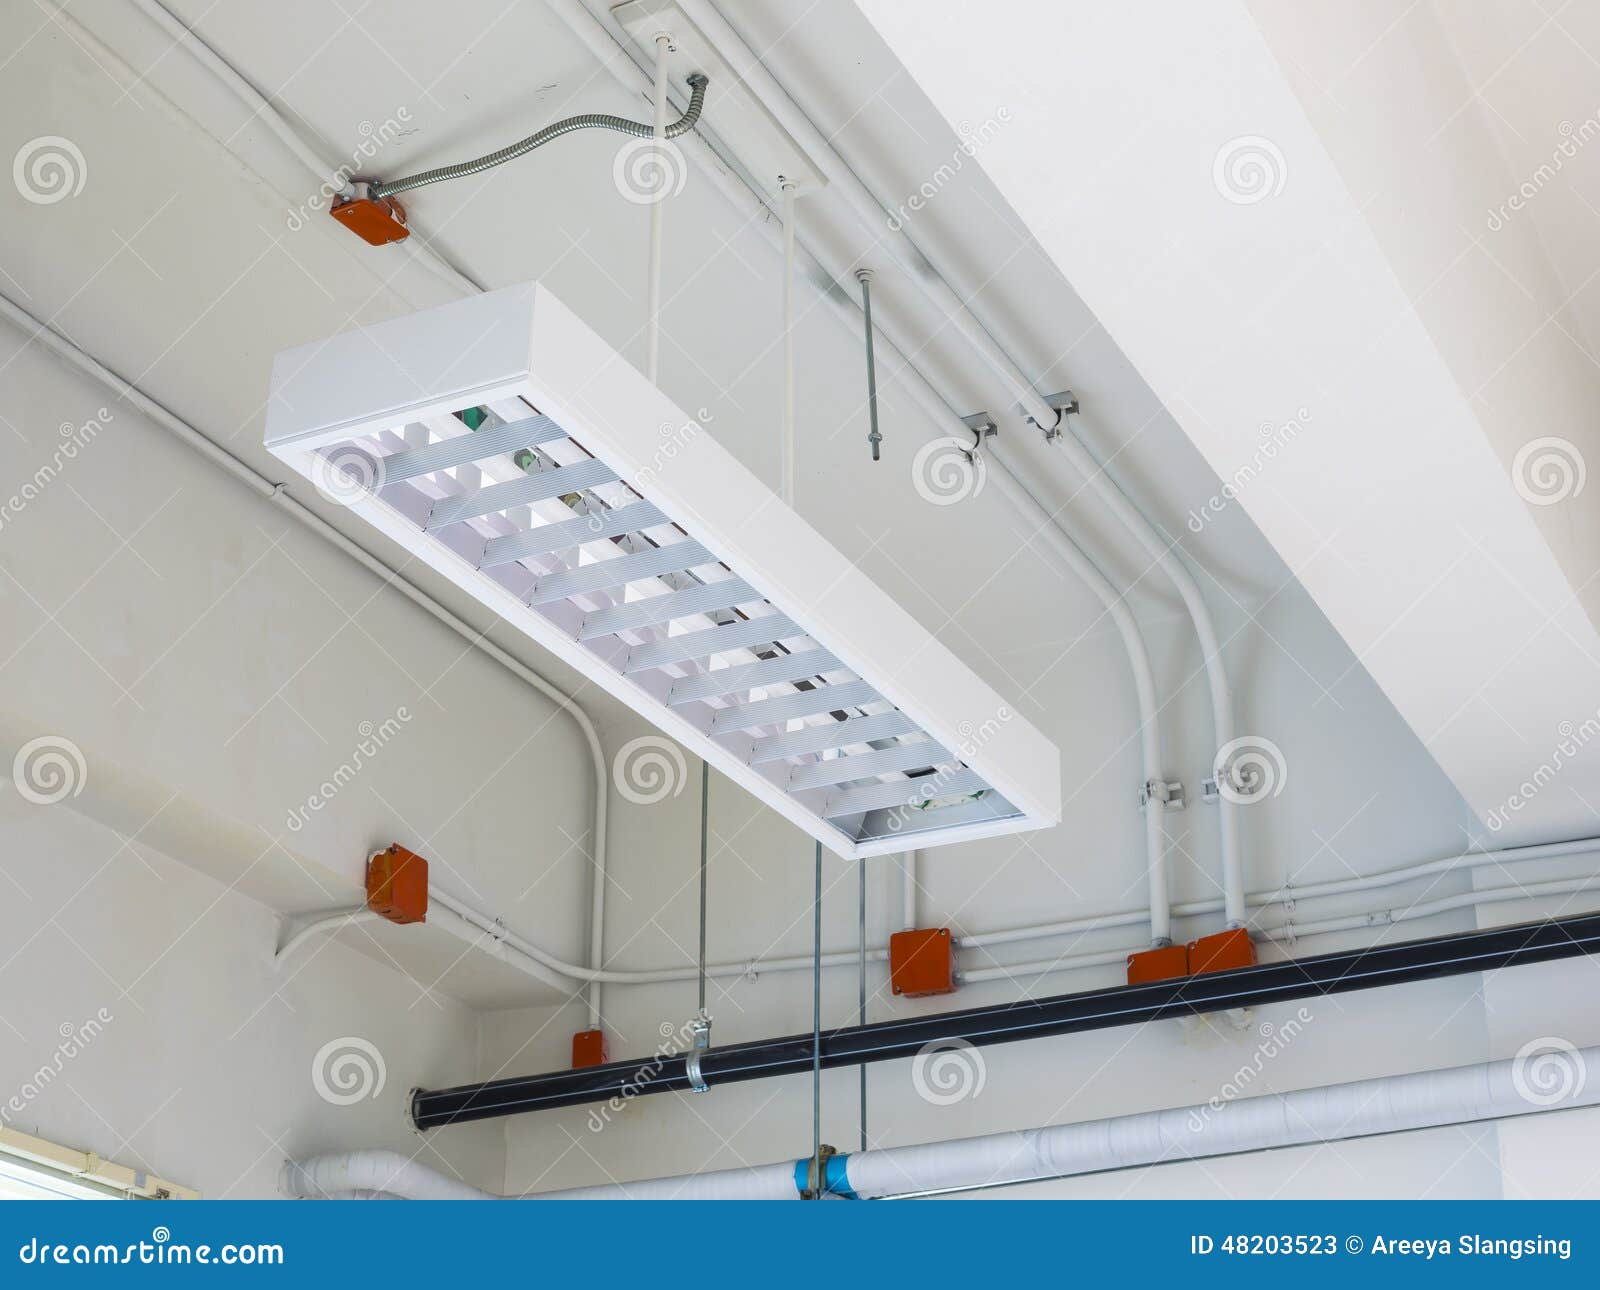 fluorescent lamp installed on ceiling